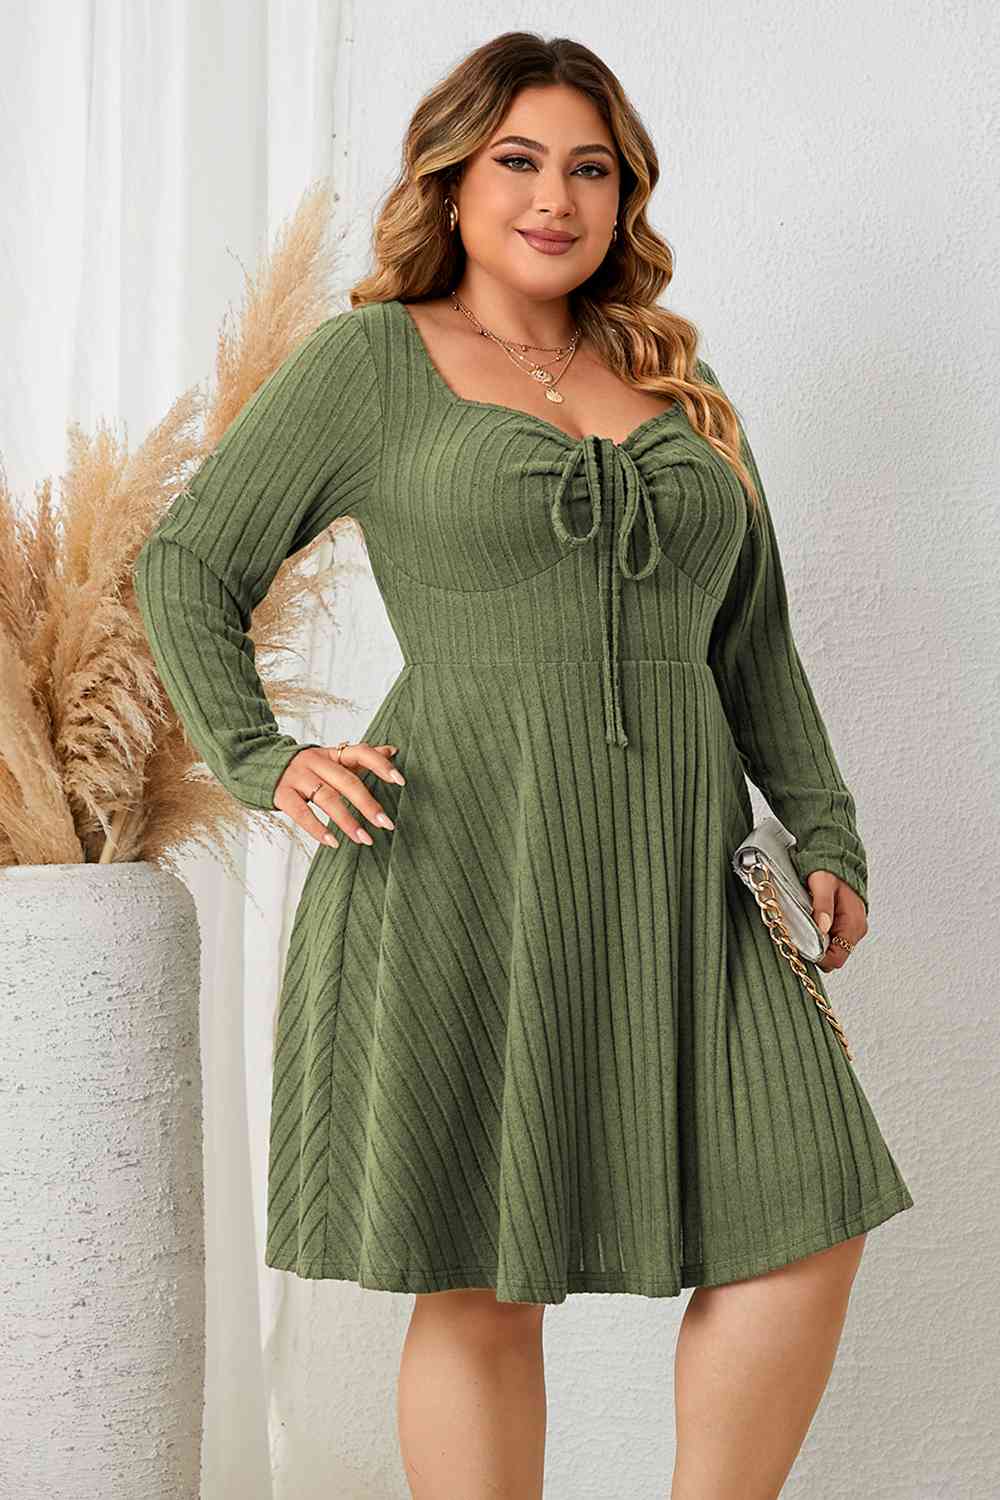 Light Gray Plus Size Sweetheart Neck Long Sleeve Ribbed Dress Plus Size Clothes